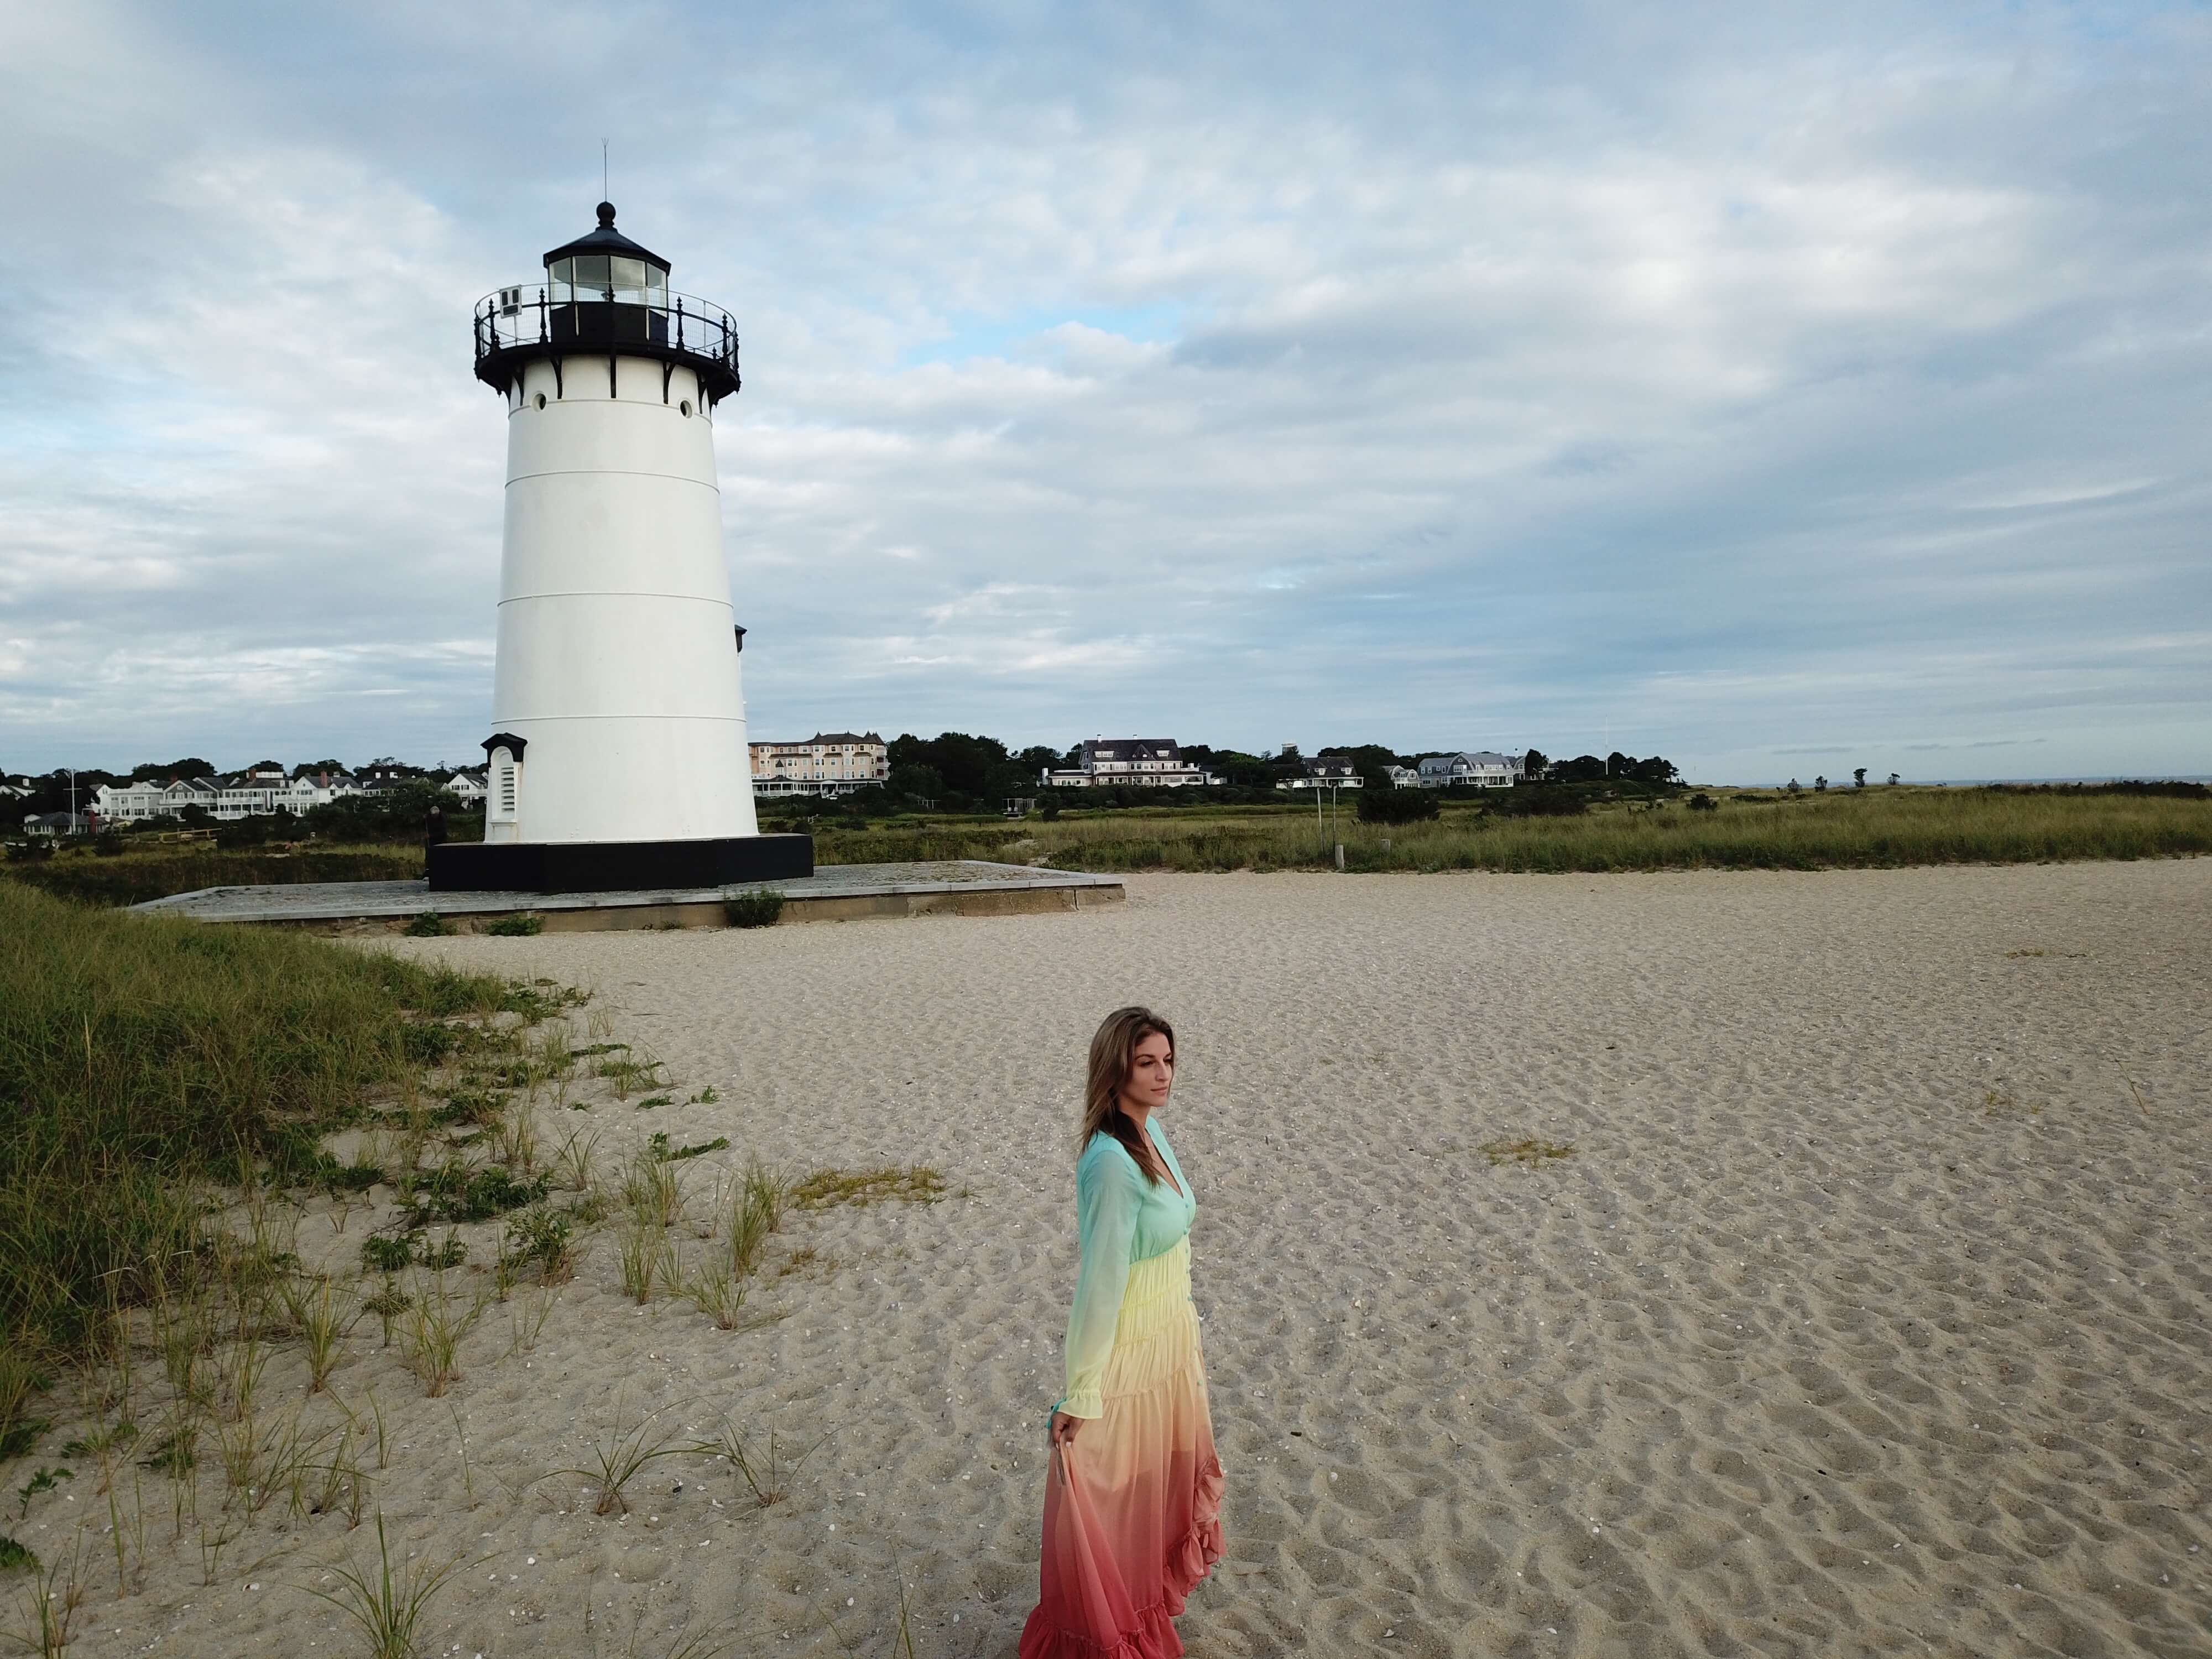 Review of our Stay at the Harbor View Hotel in Martha's Vineyard